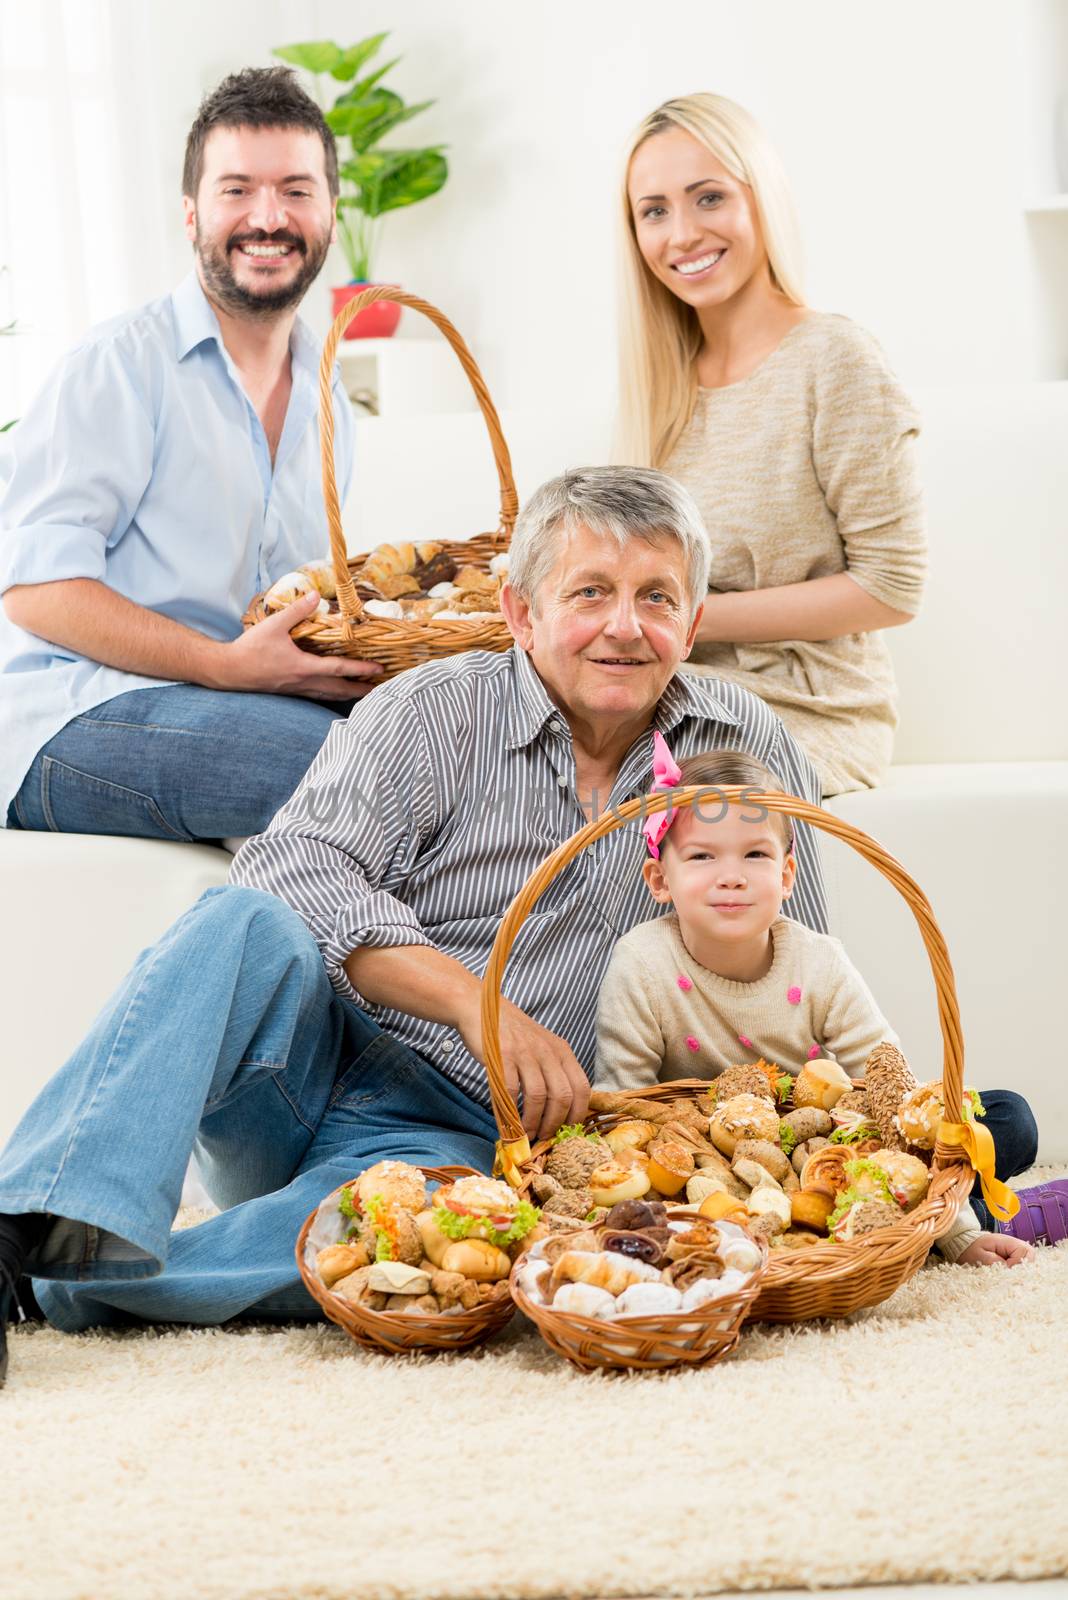 Senior man and a little girl are sitting on the living room floor. In front of them is woven basket with pastries, and behind them young parents are sitting on the couch and hold a basket of pastries.